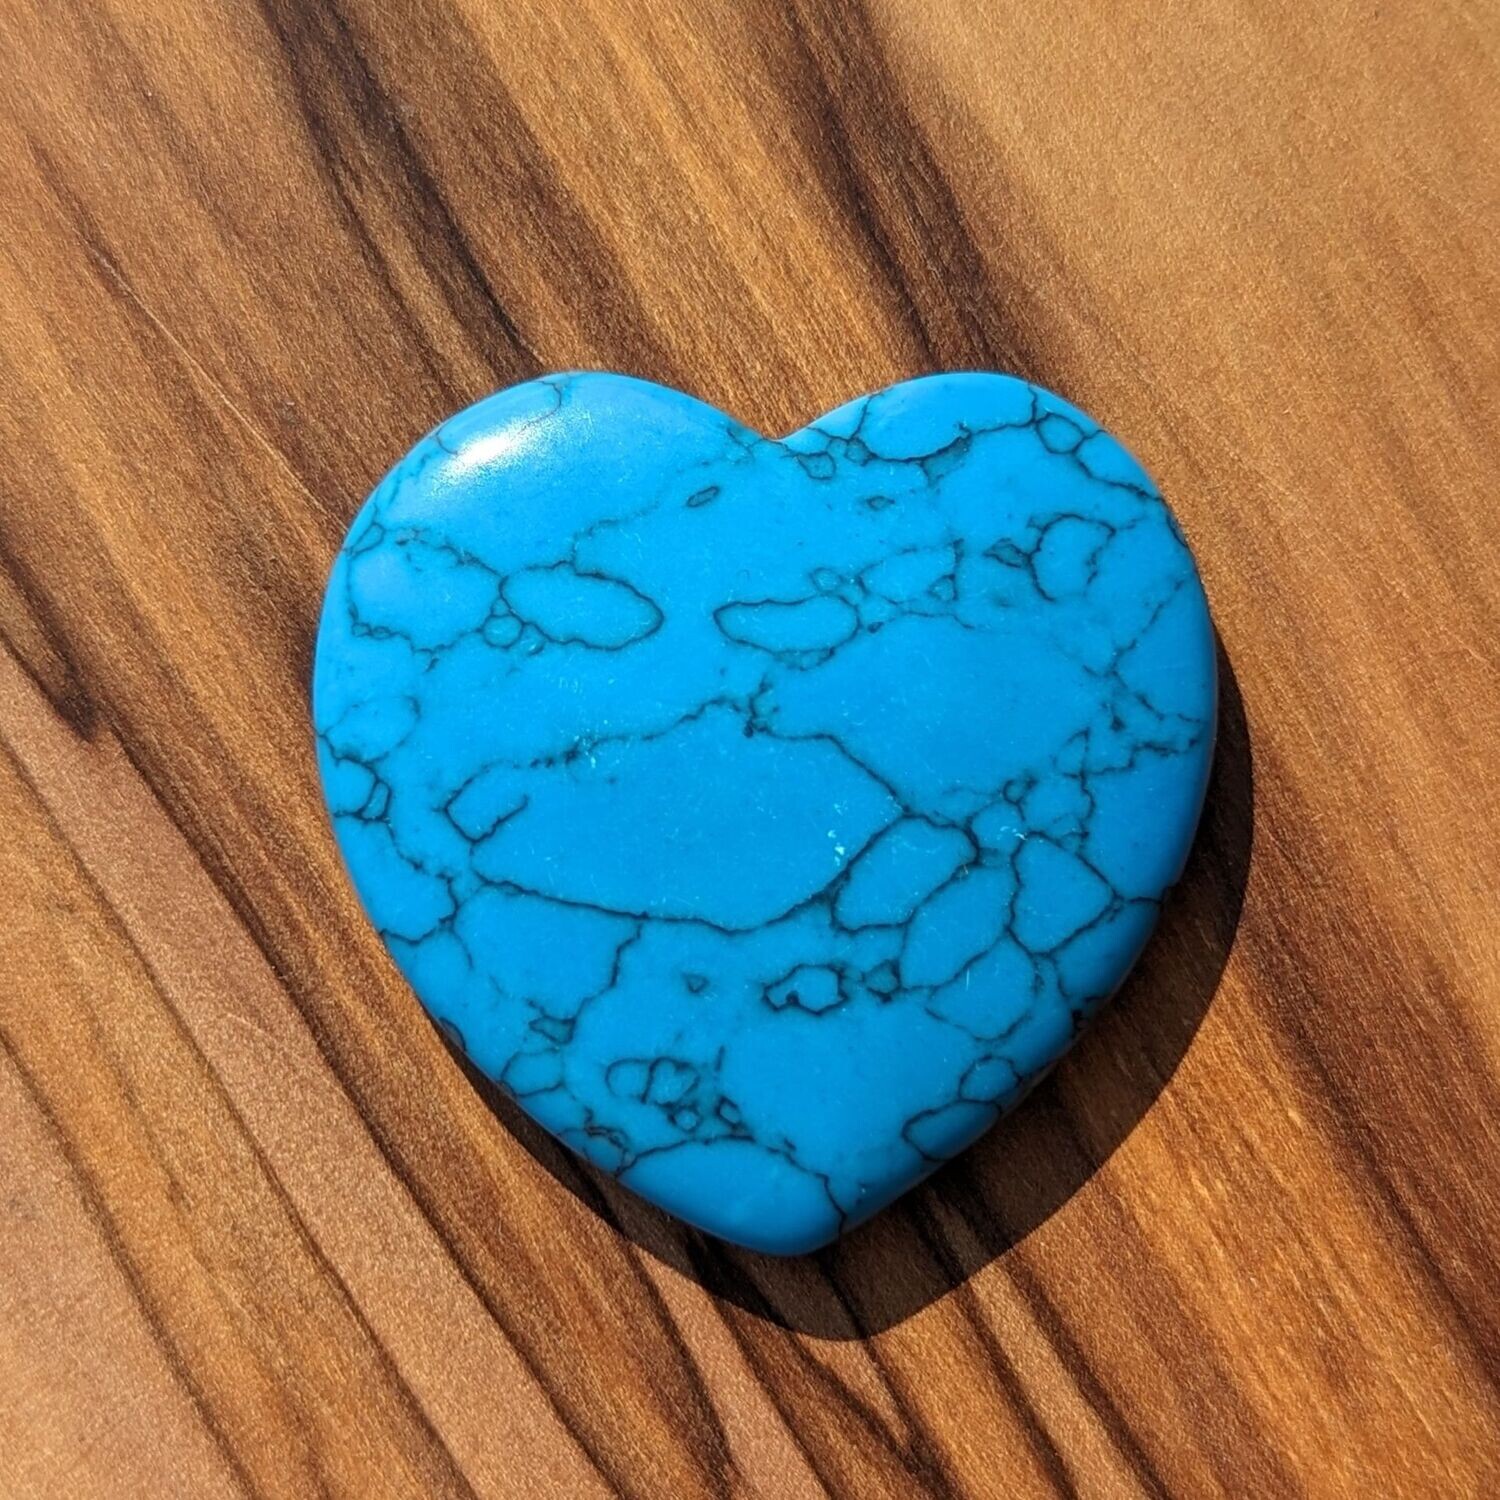 Small Turquoise Heart